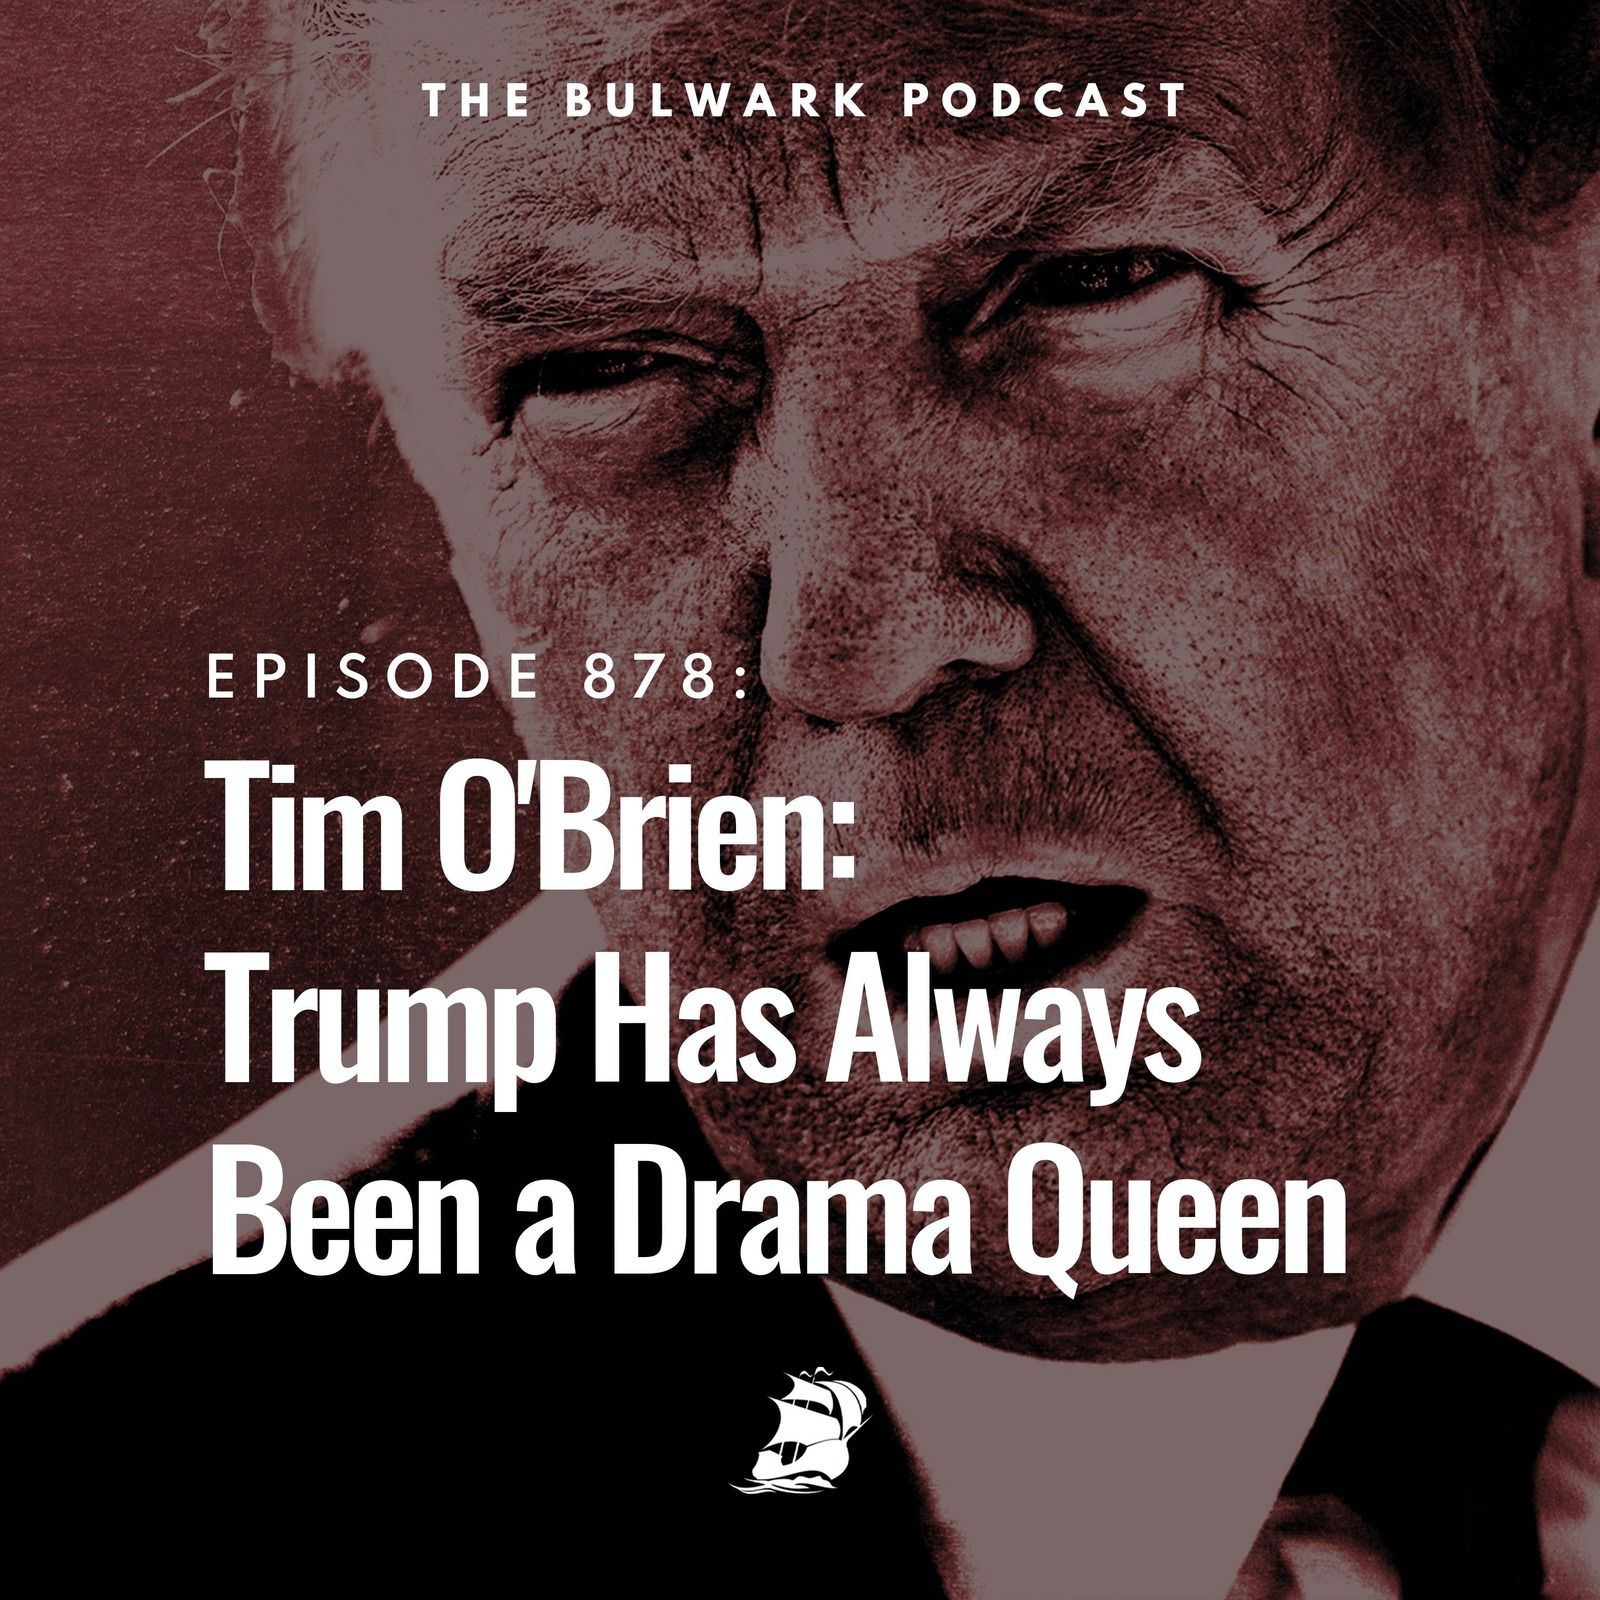 Tim O'Brien: Trump Has Always Been a Drama Queen by The Bulwark Podcast